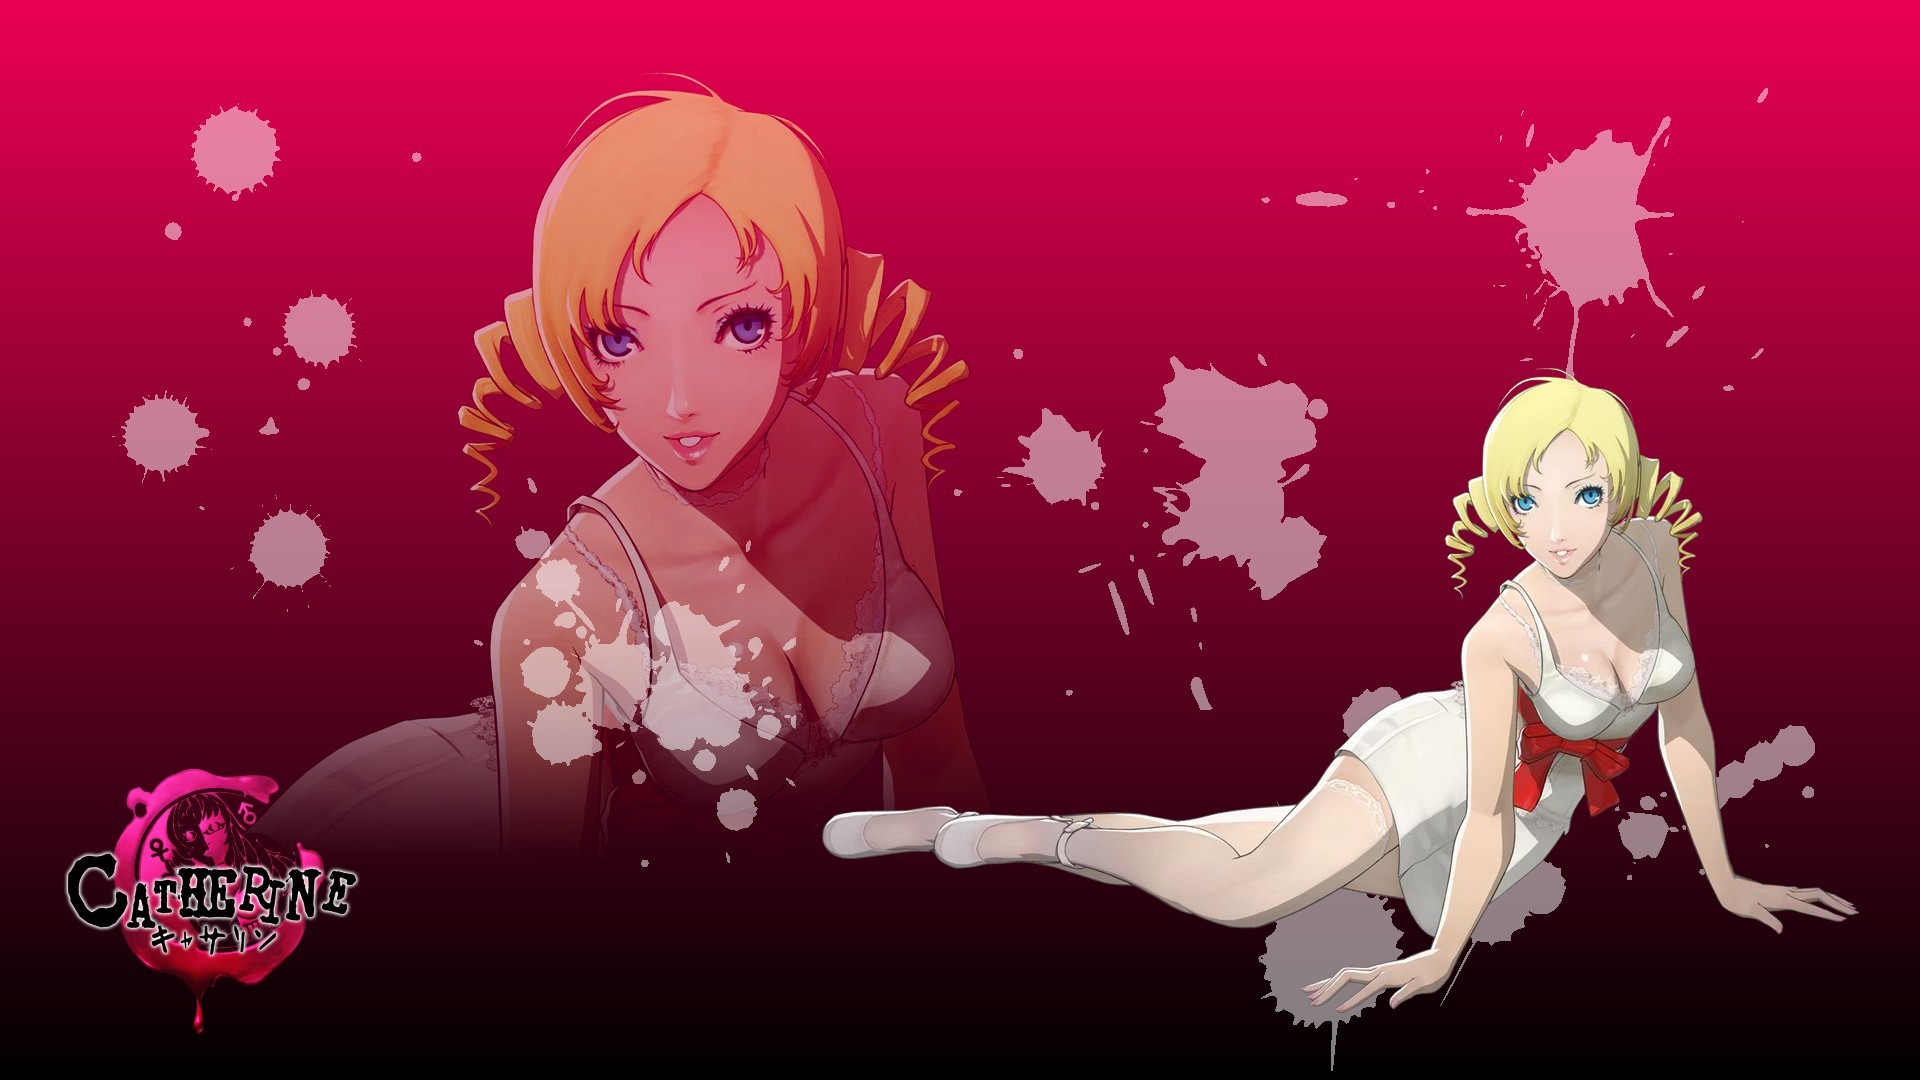 1920x1080 Wallpaper #11 Wallpaper from Catherine